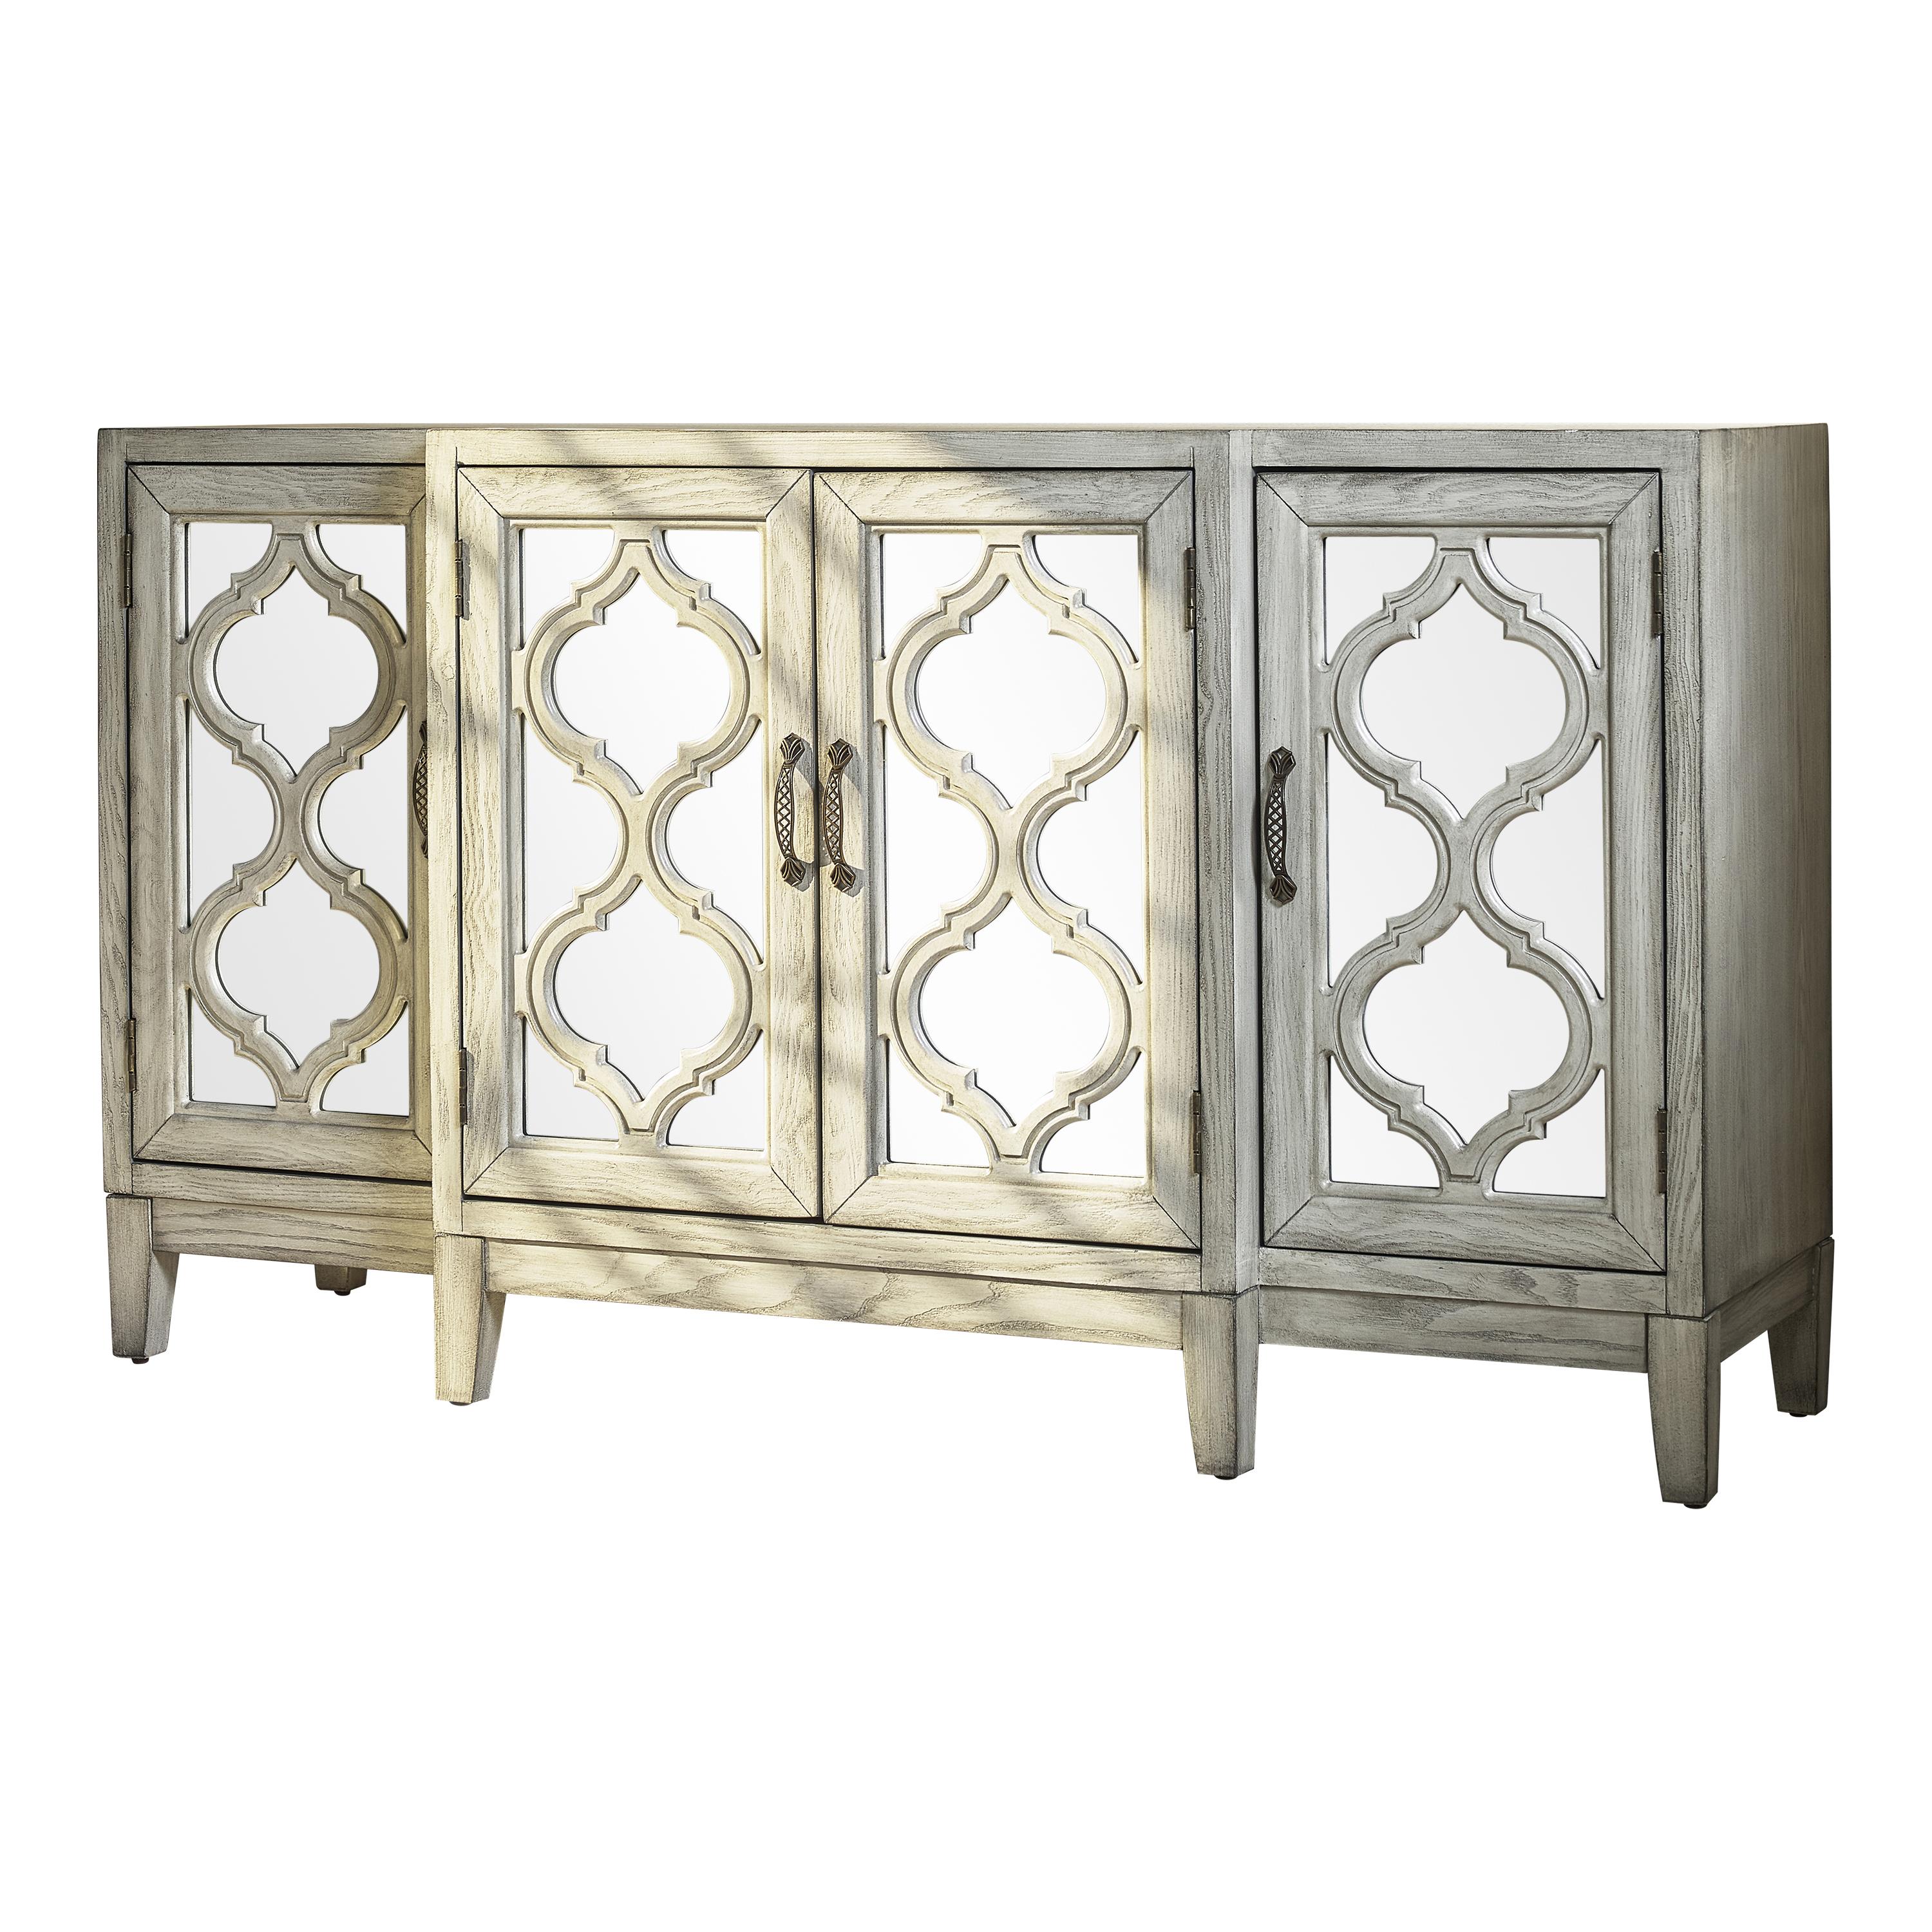 Vintage Accent Cabinet 953376 953376 in Antique White 